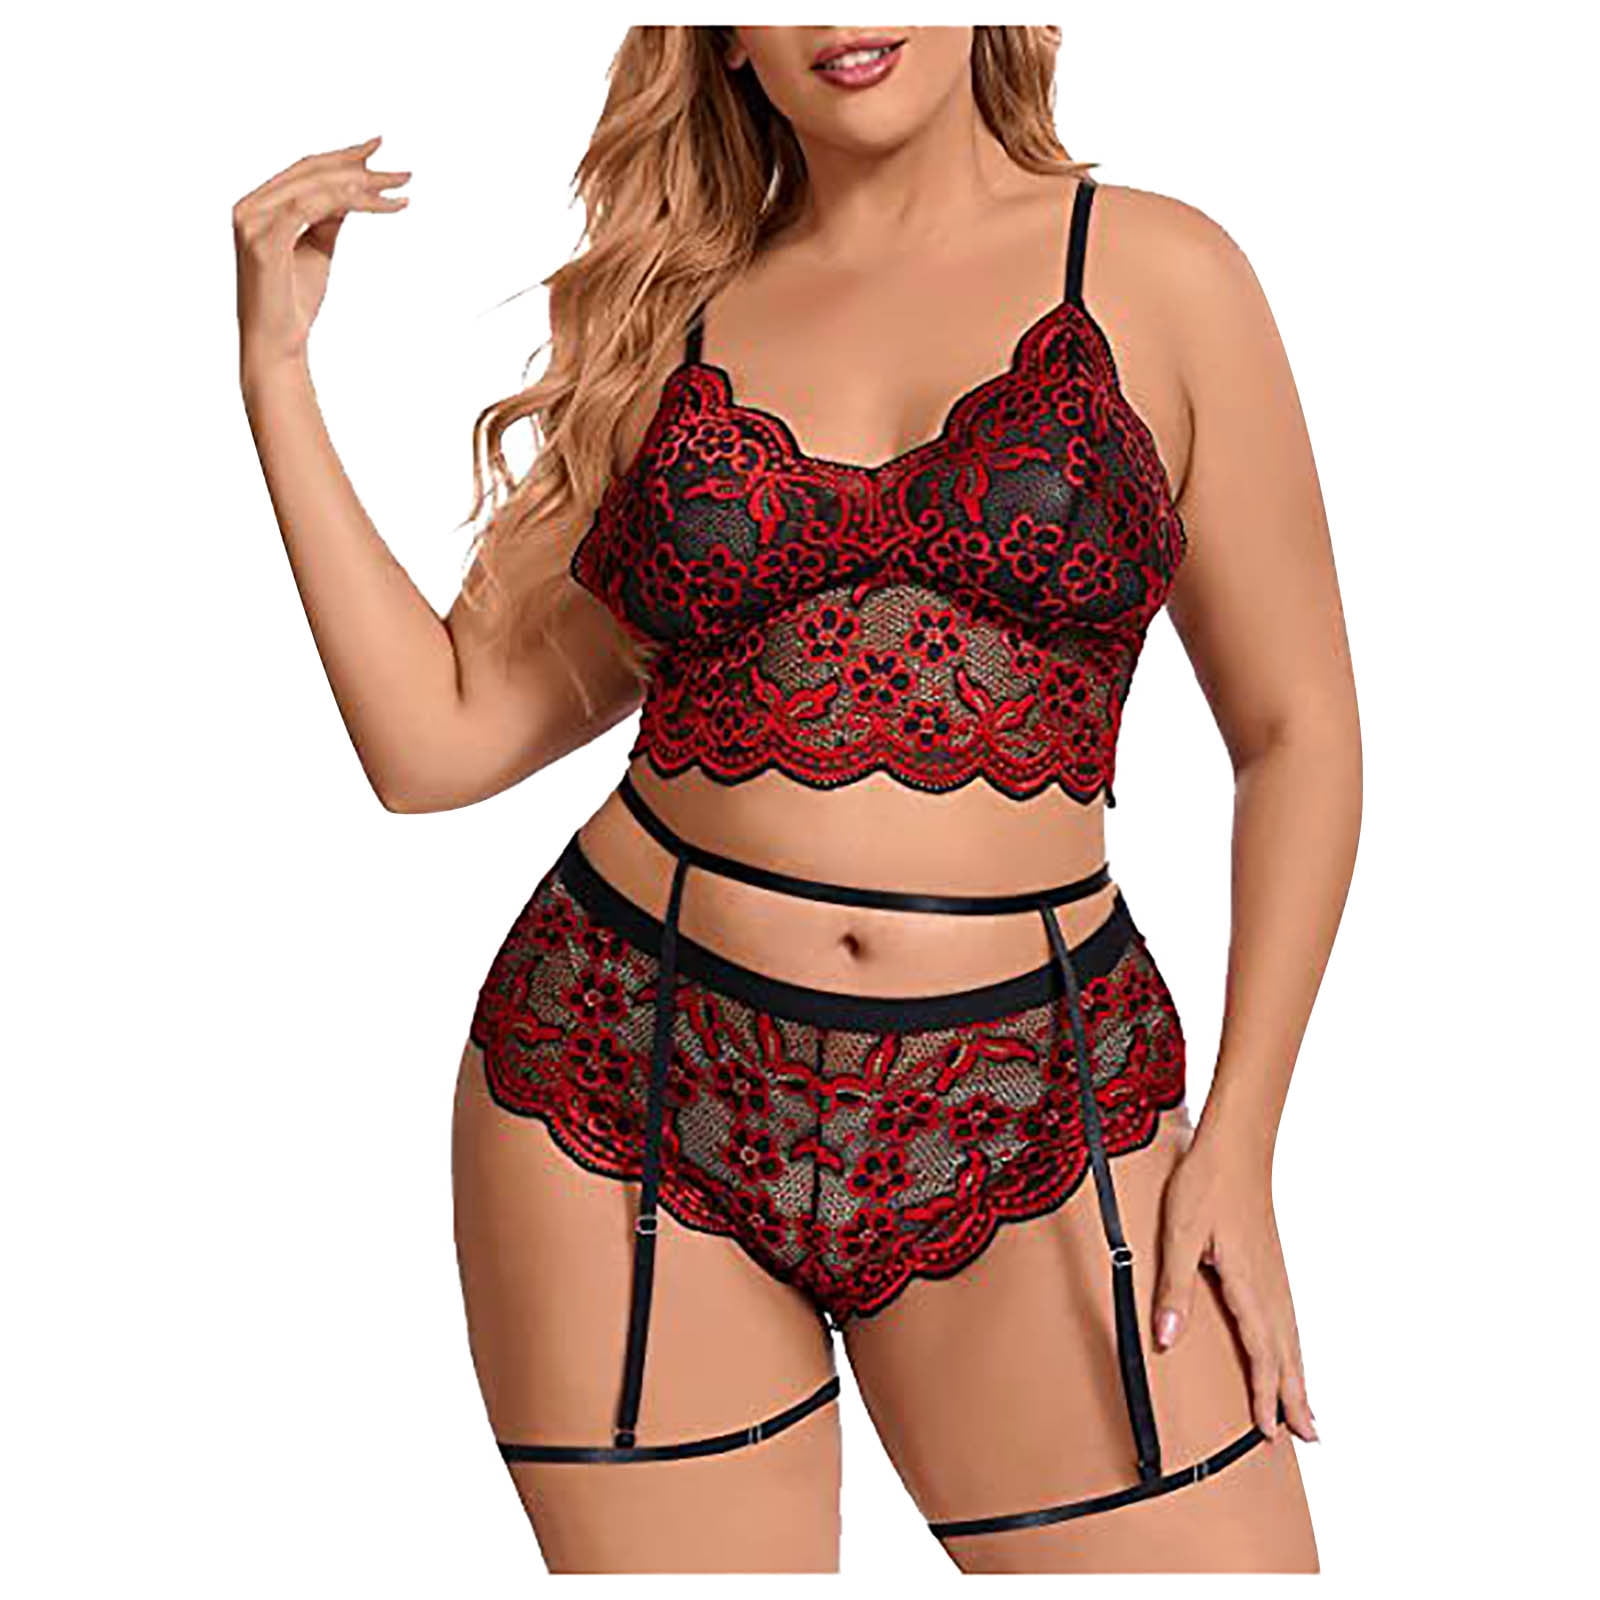 Homely Red Leather Lingerie Women Plus Size Underwire Lingerie Set